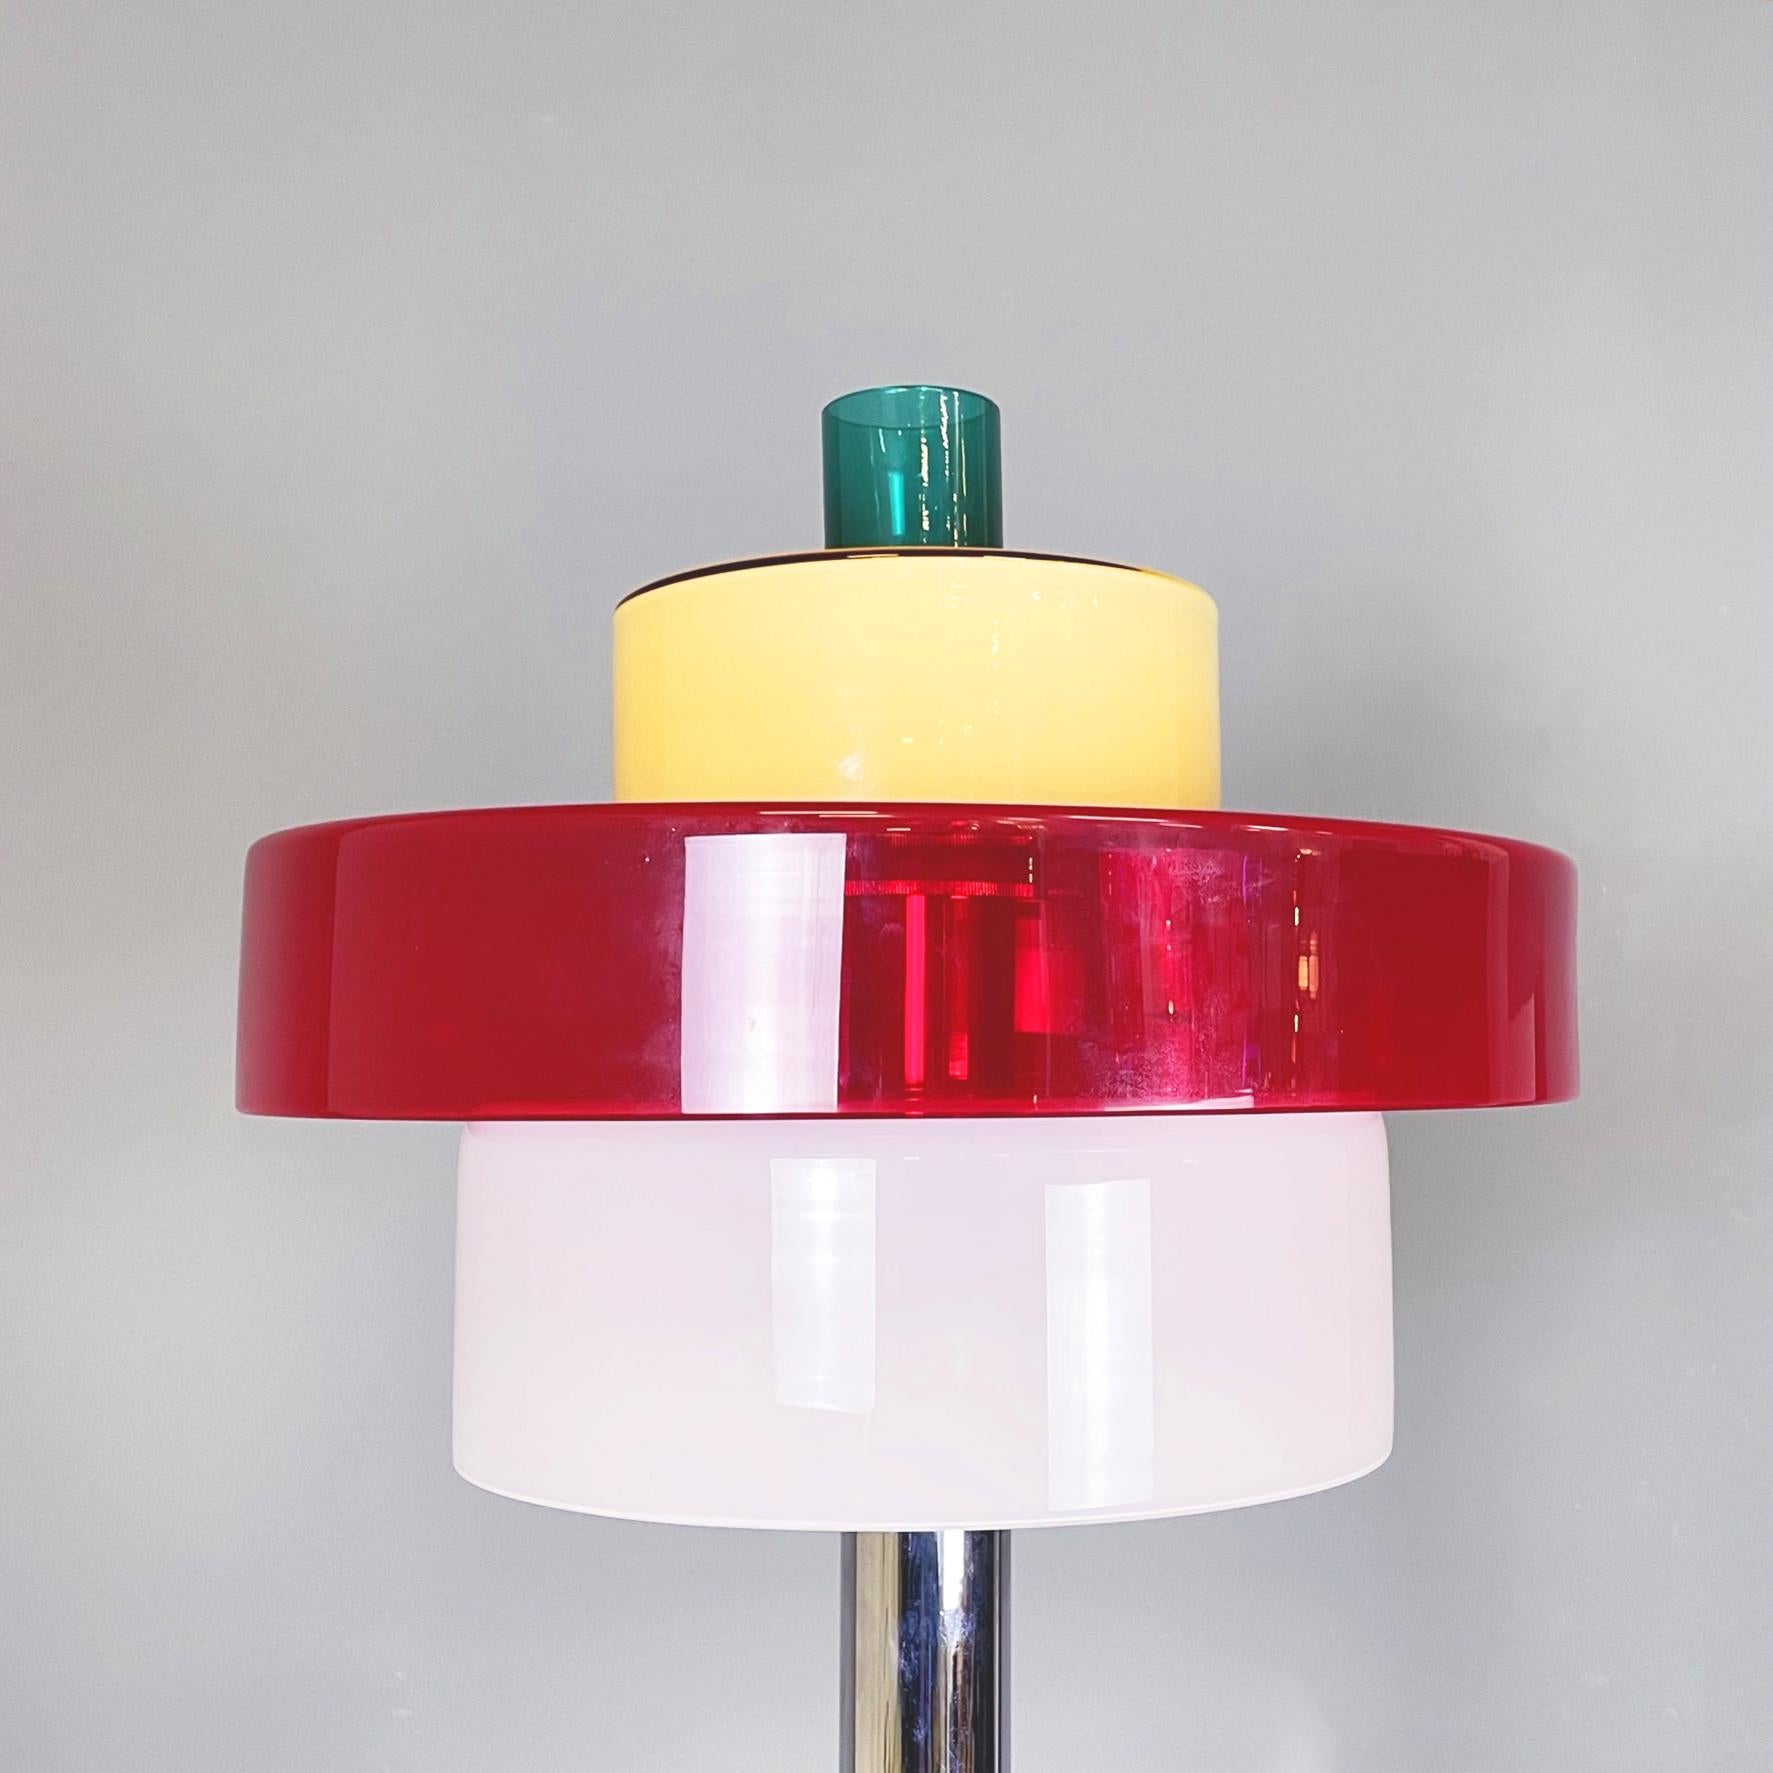 Italian Modern Glass Floor Lamp Allarnisam by Ettore Sottsass for Venini, 1990s In Good Condition For Sale In MIlano, IT